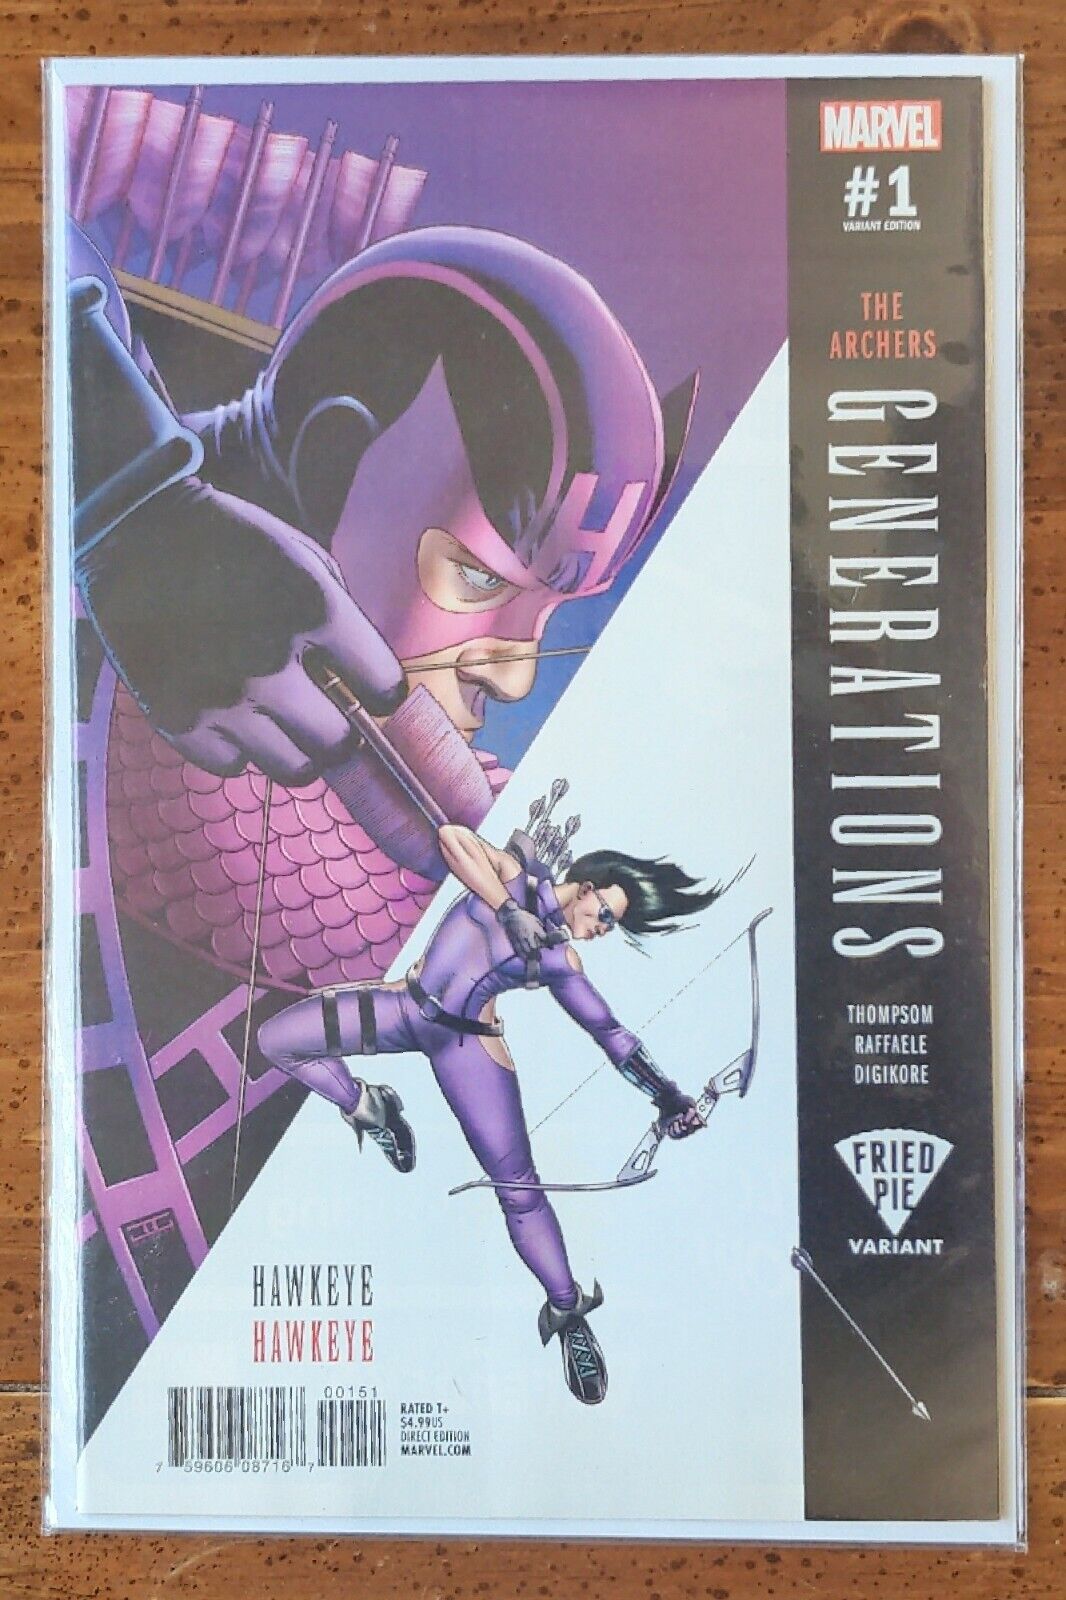 GENERATIONS THE ARCHERS #1 FRIED PIE VARIANT HAWKEYE COMIC KINGS